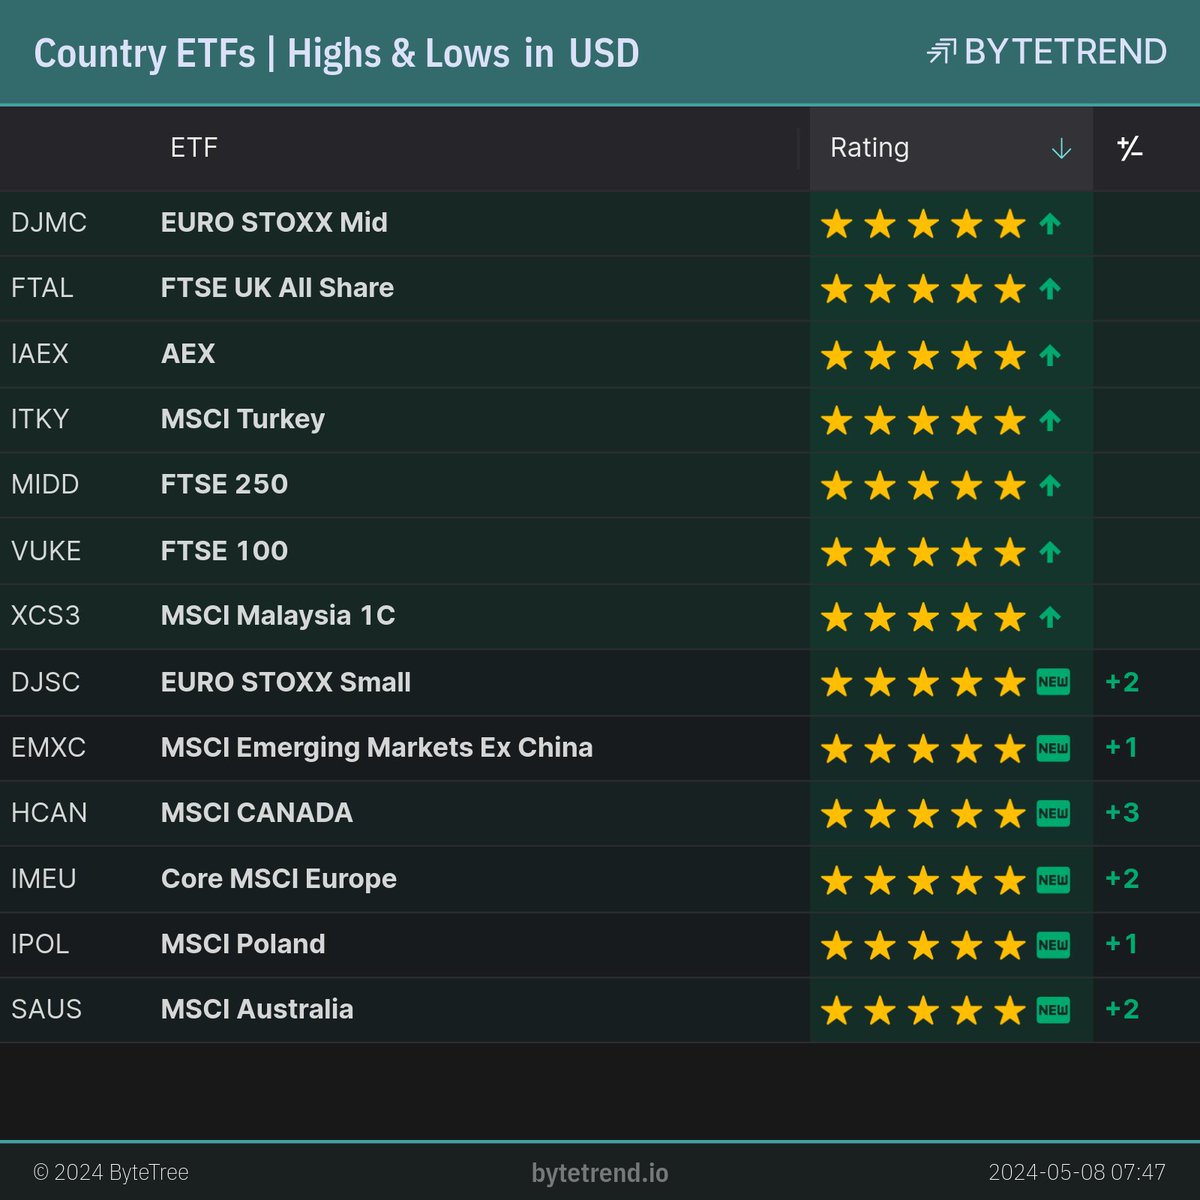 Country ETFs | Highs & Lows in US Dollar

#DJMC, #FTAL, #IAEX and 4 others are in an uptrend and made a new high yesterday.
#DJSC, #EMXC, #HCAN and 3 others are a new uptrend.

London Closing prices, captured @ May 8, 2024, 7:50 AM

bytetrend.io